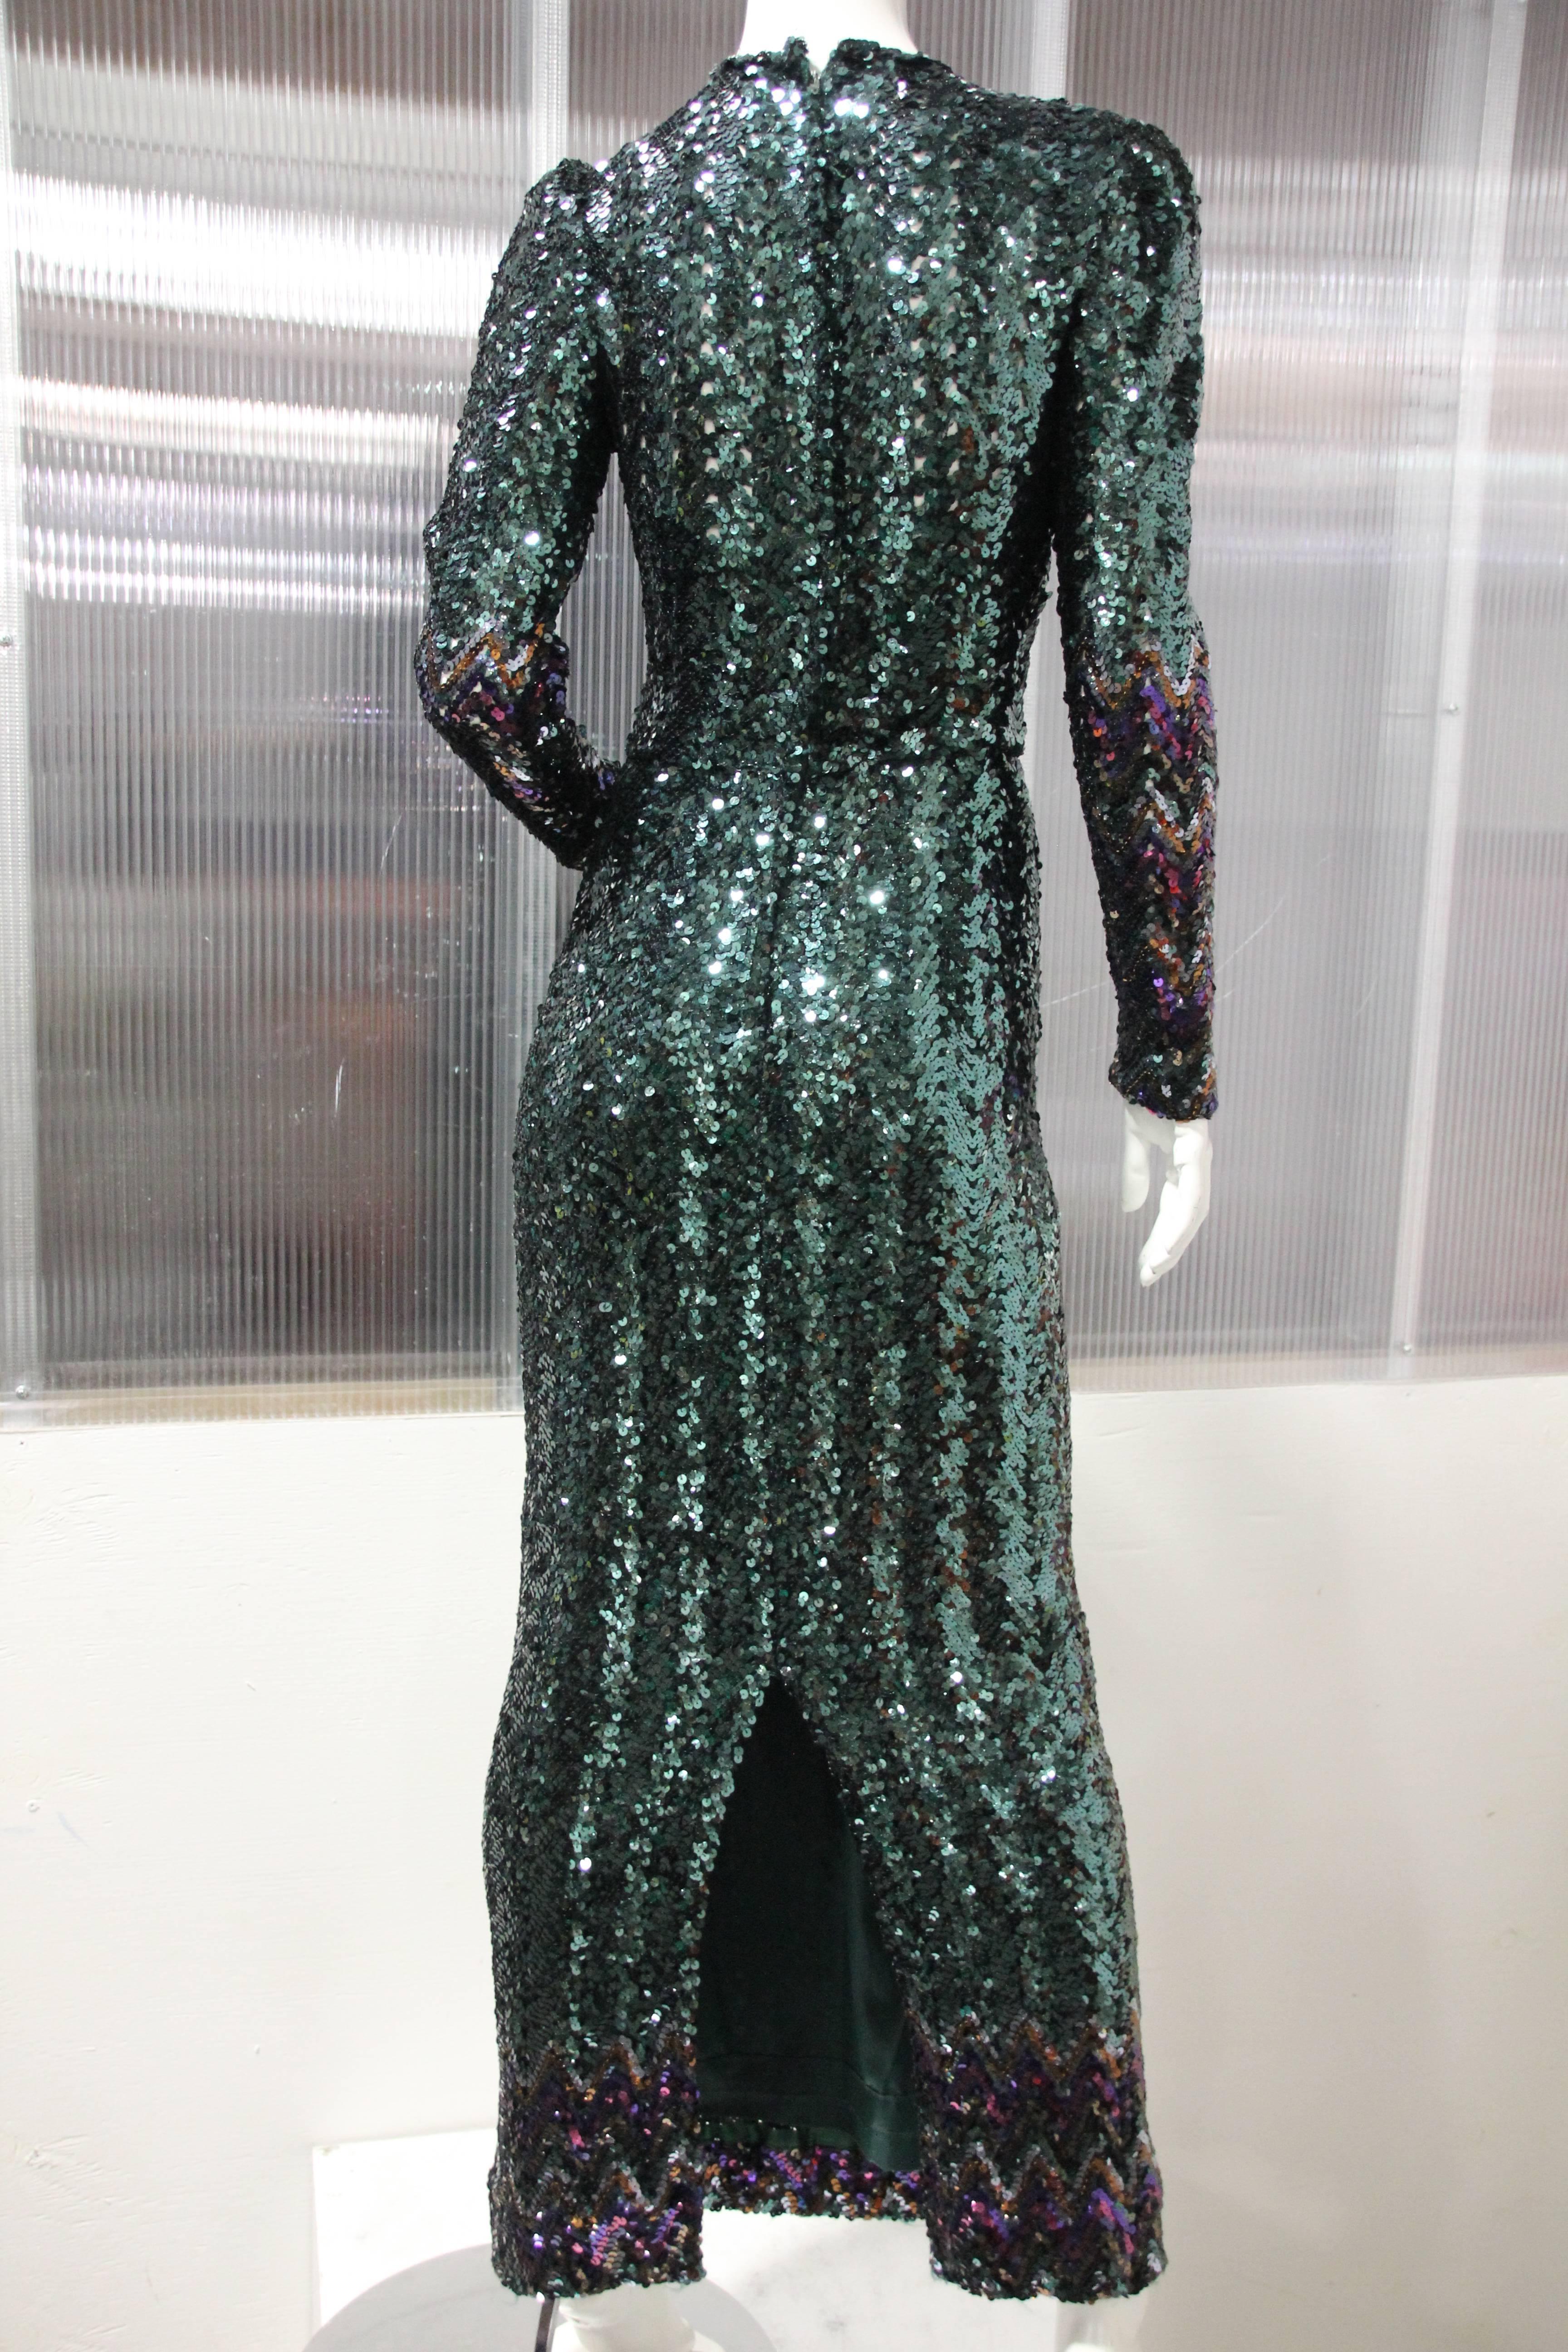 Women's or Men's Moss Green Sequin Disco Gown With Colorful Cuffs and Hem, 1970s